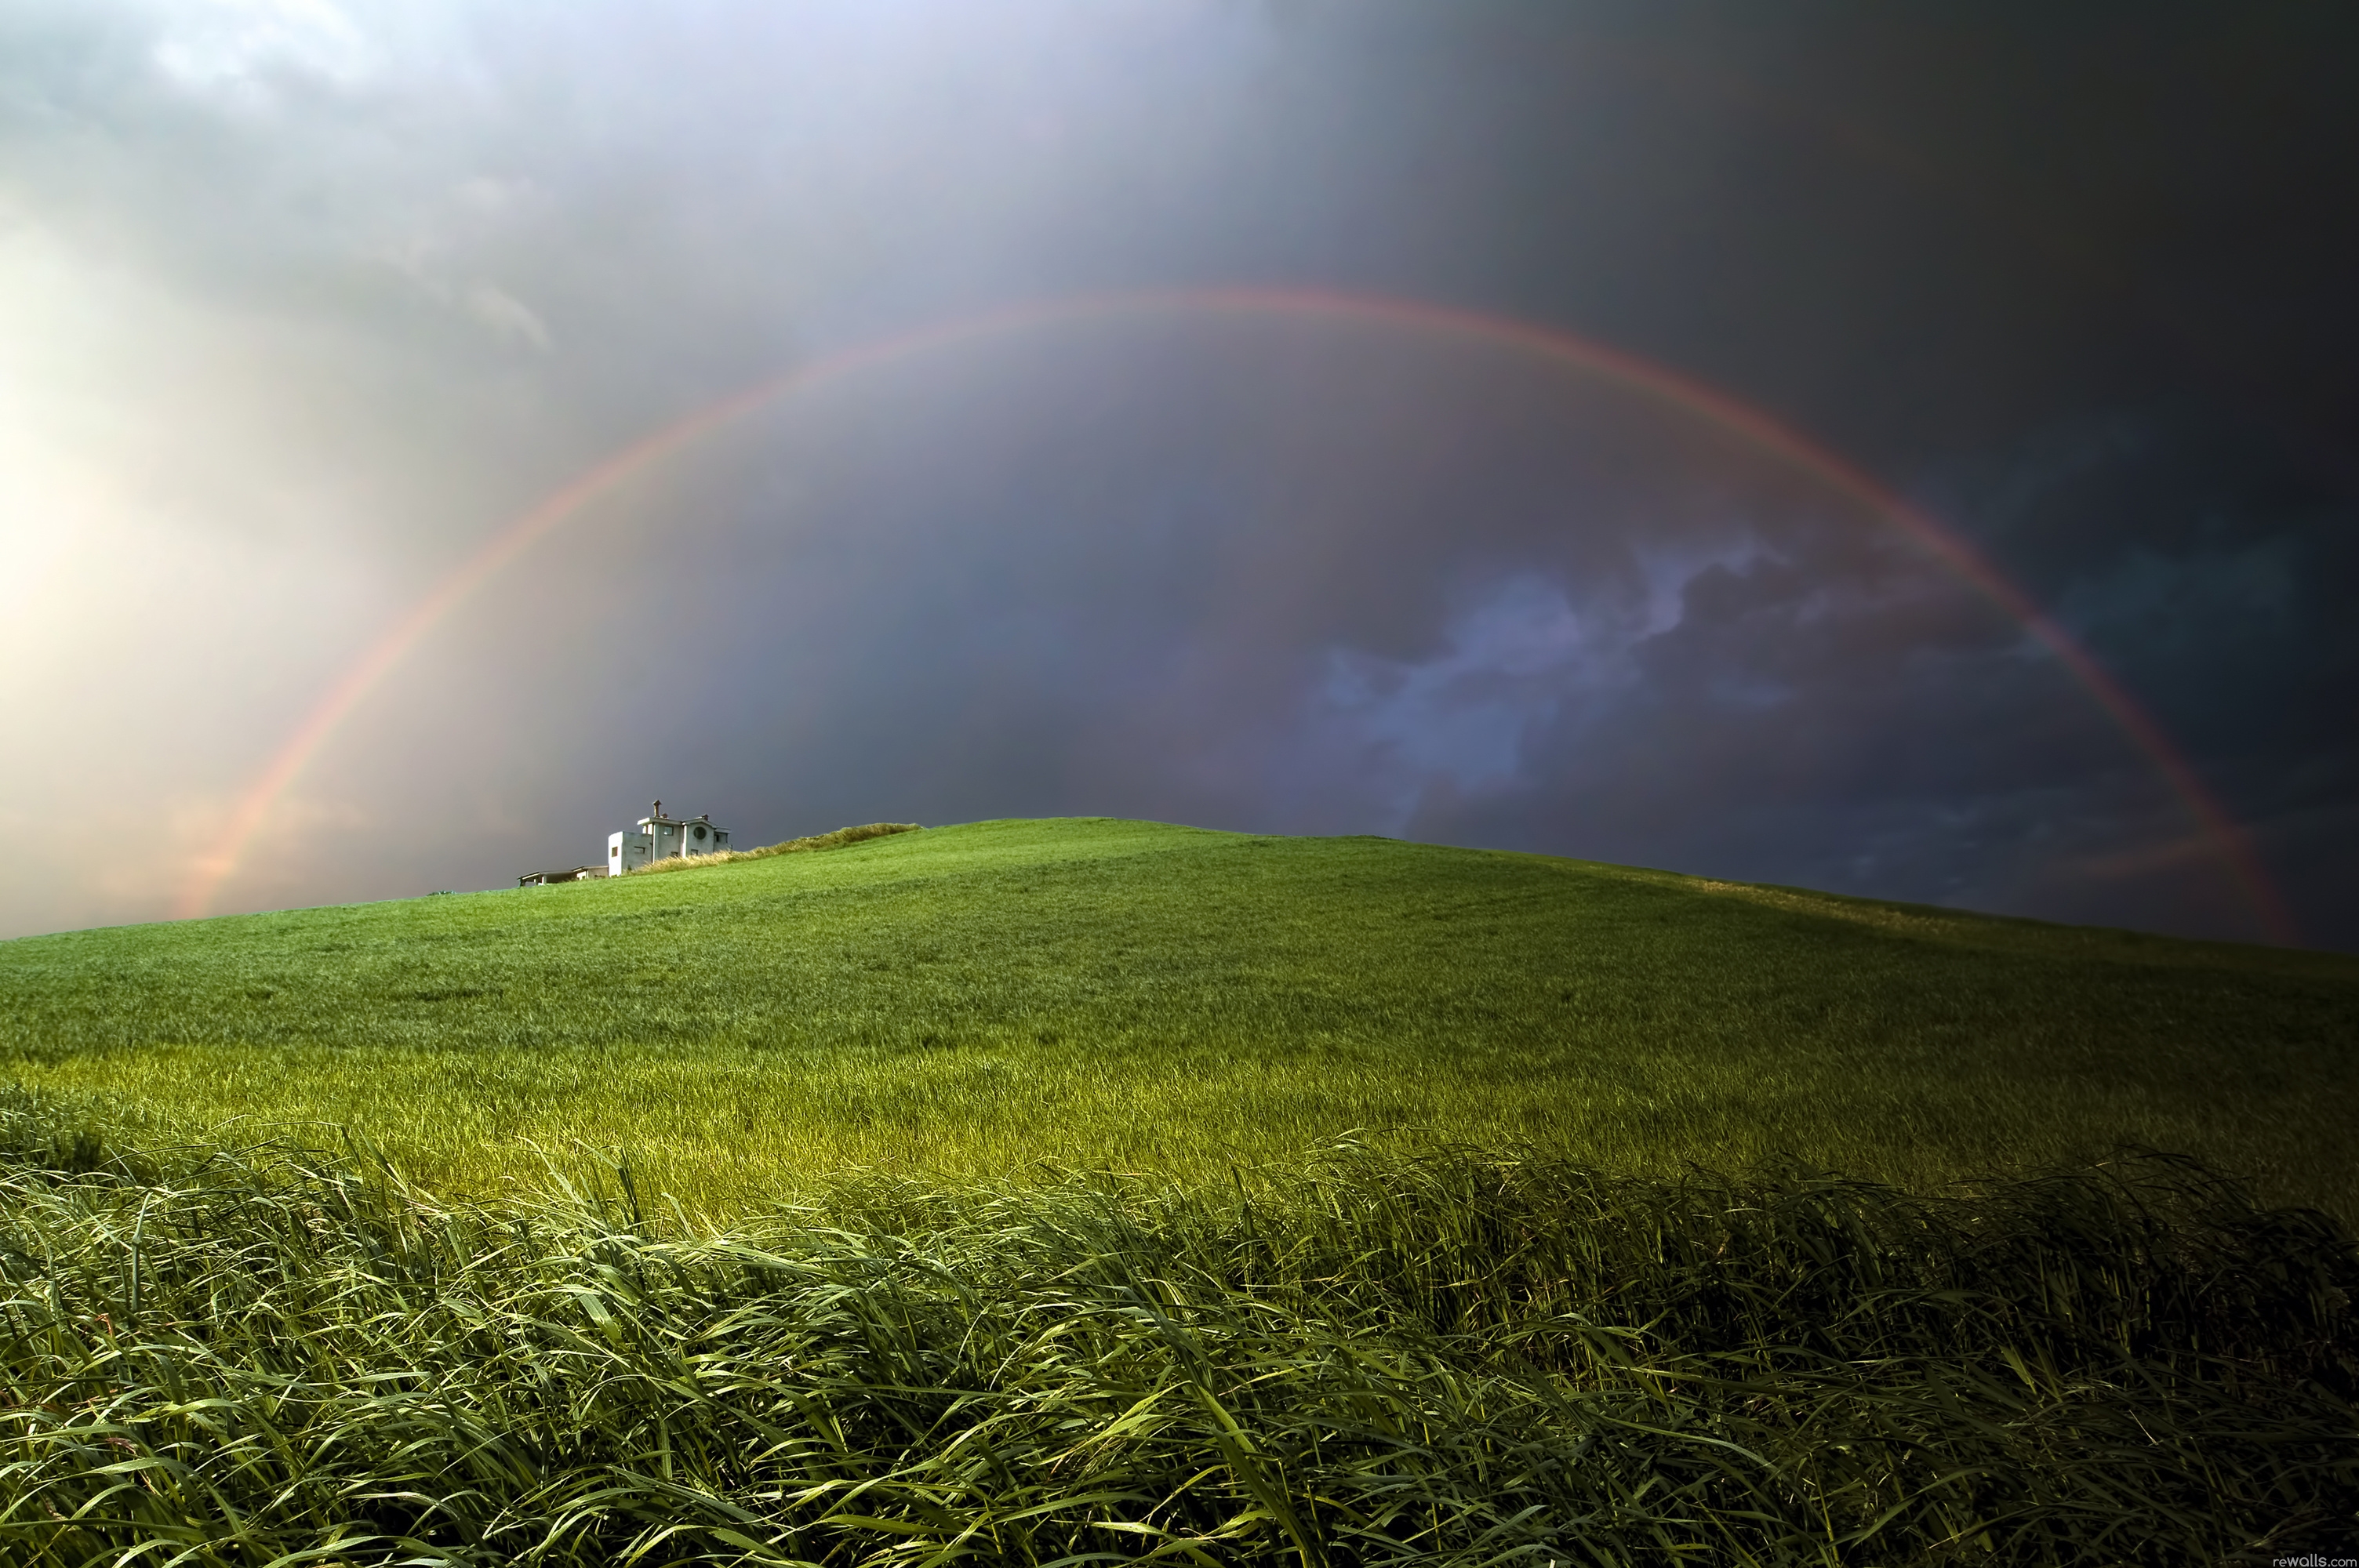 rainbow, nature, building, field, construction, mainly cloudy, overcast, hill, meadow